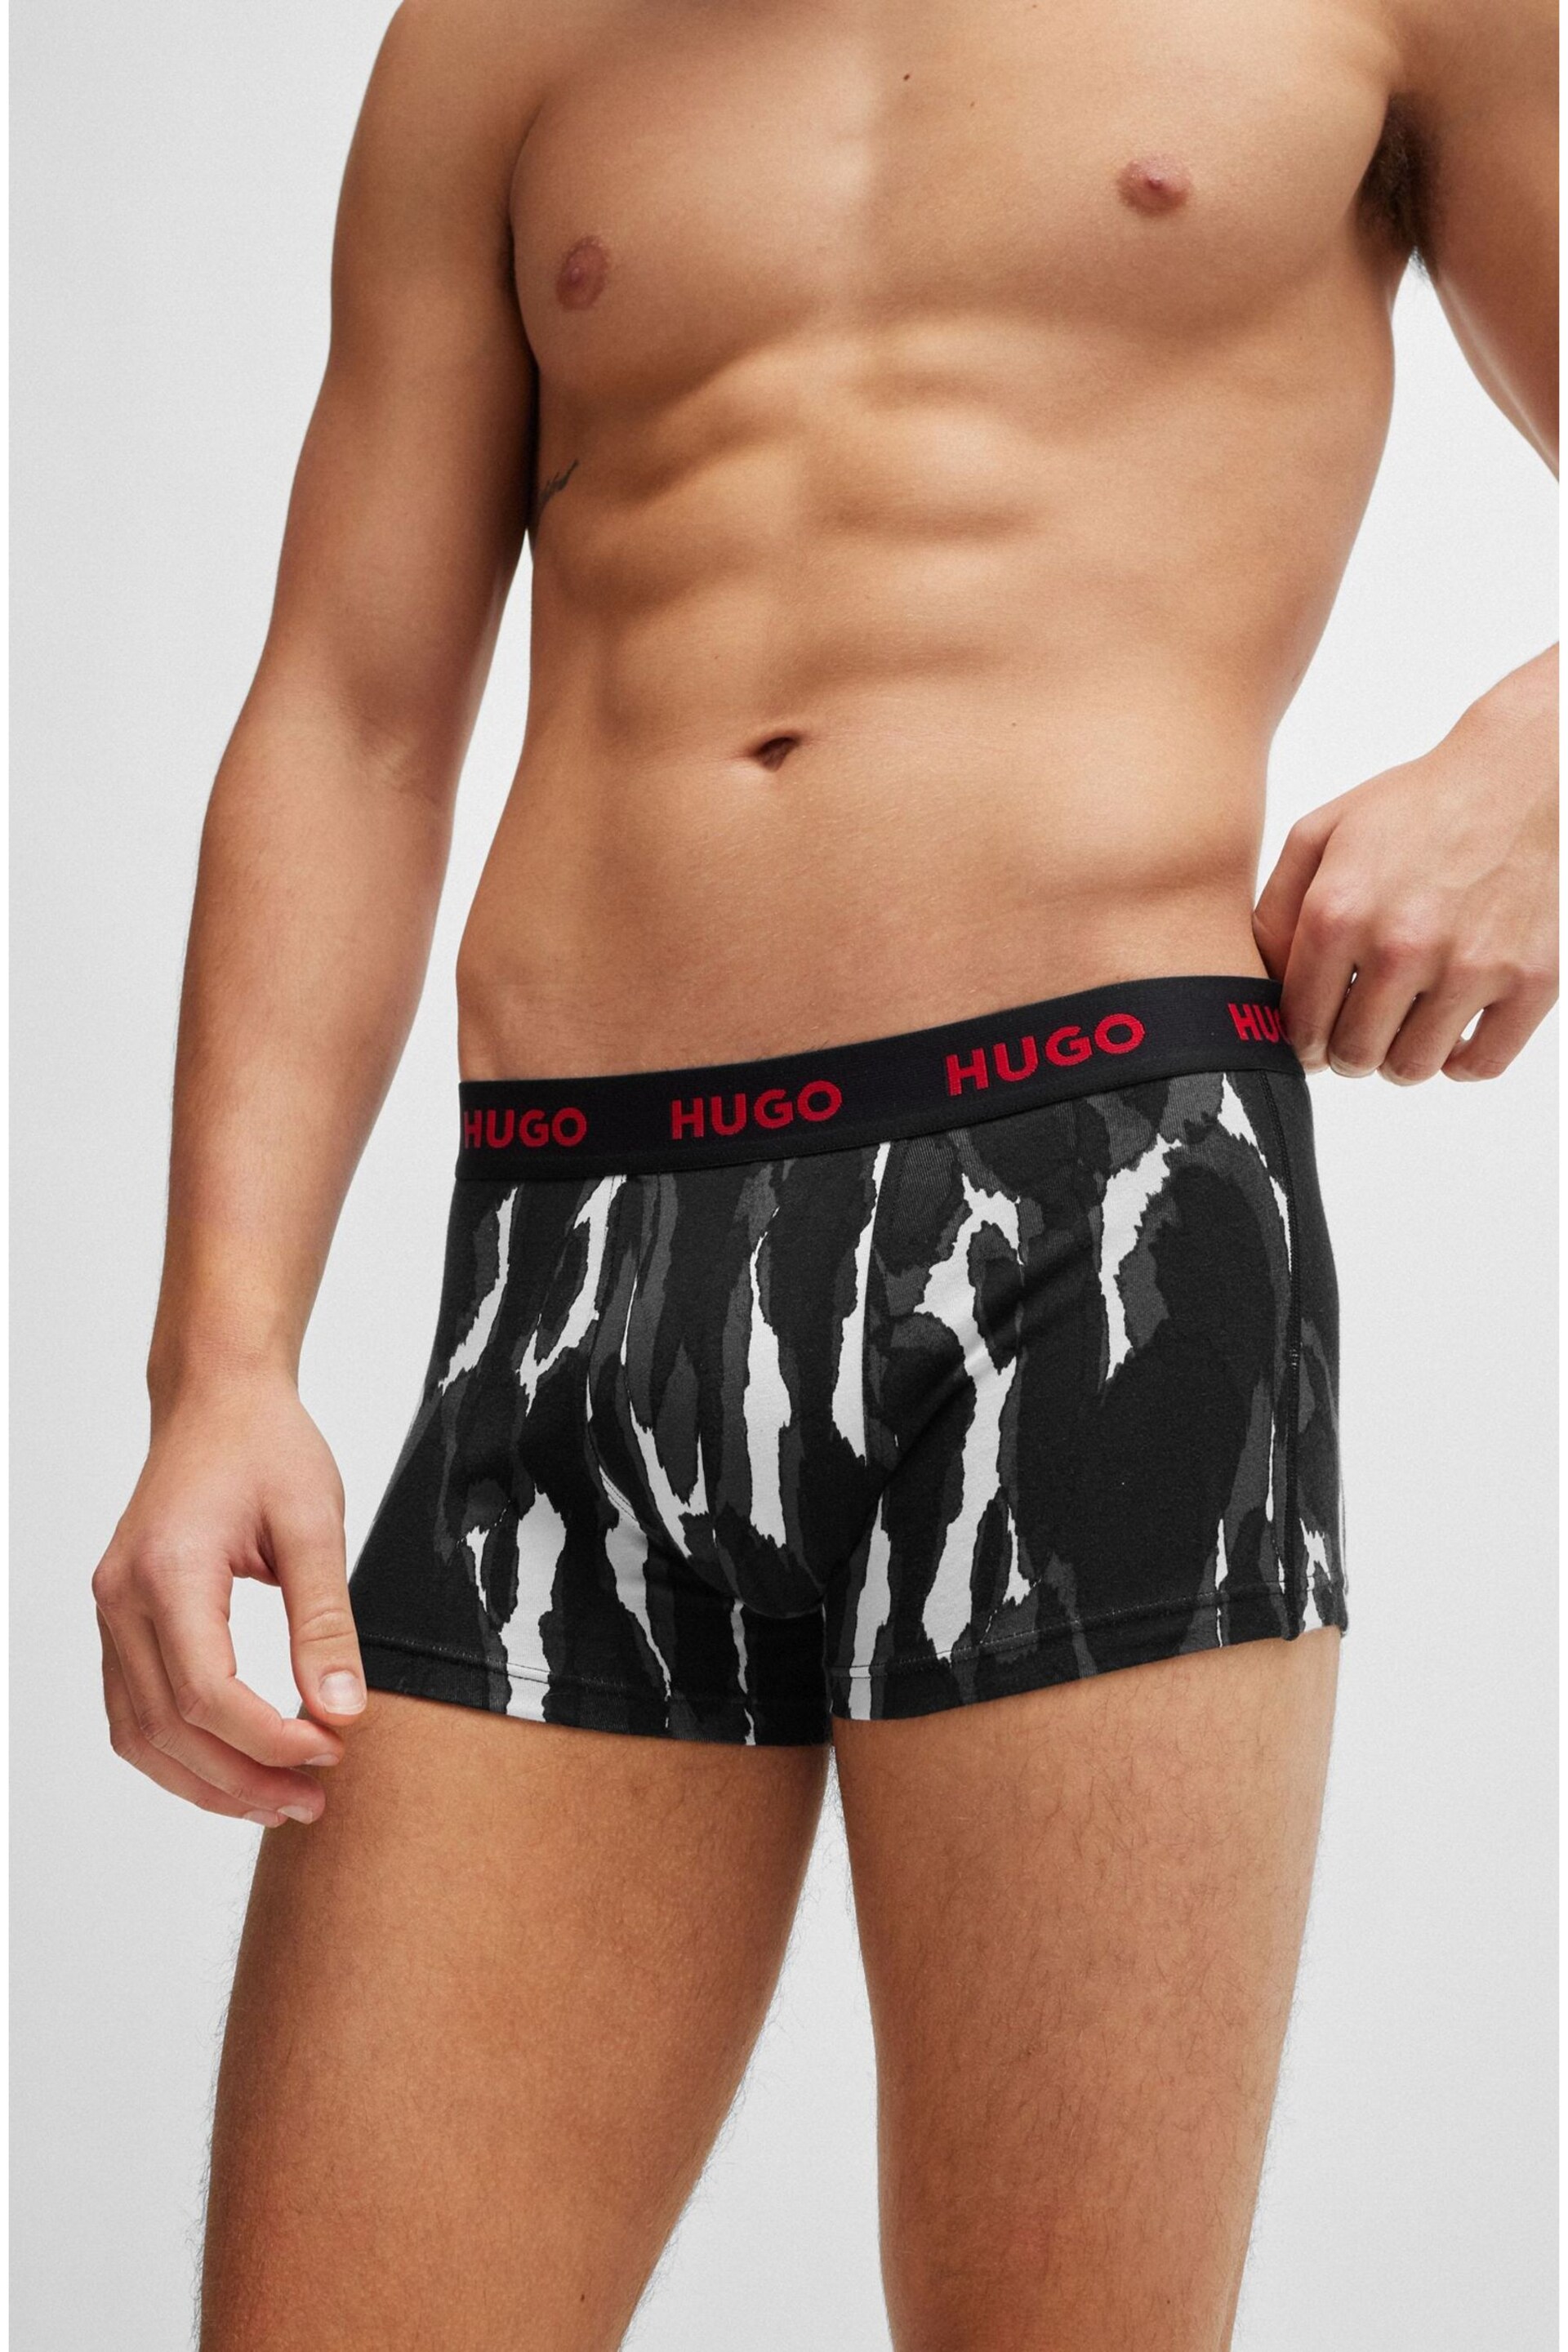 HUGO Grey Of Stretch-Cotton Trunks 3 Pack With Logo Waistbands - Image 5 of 6